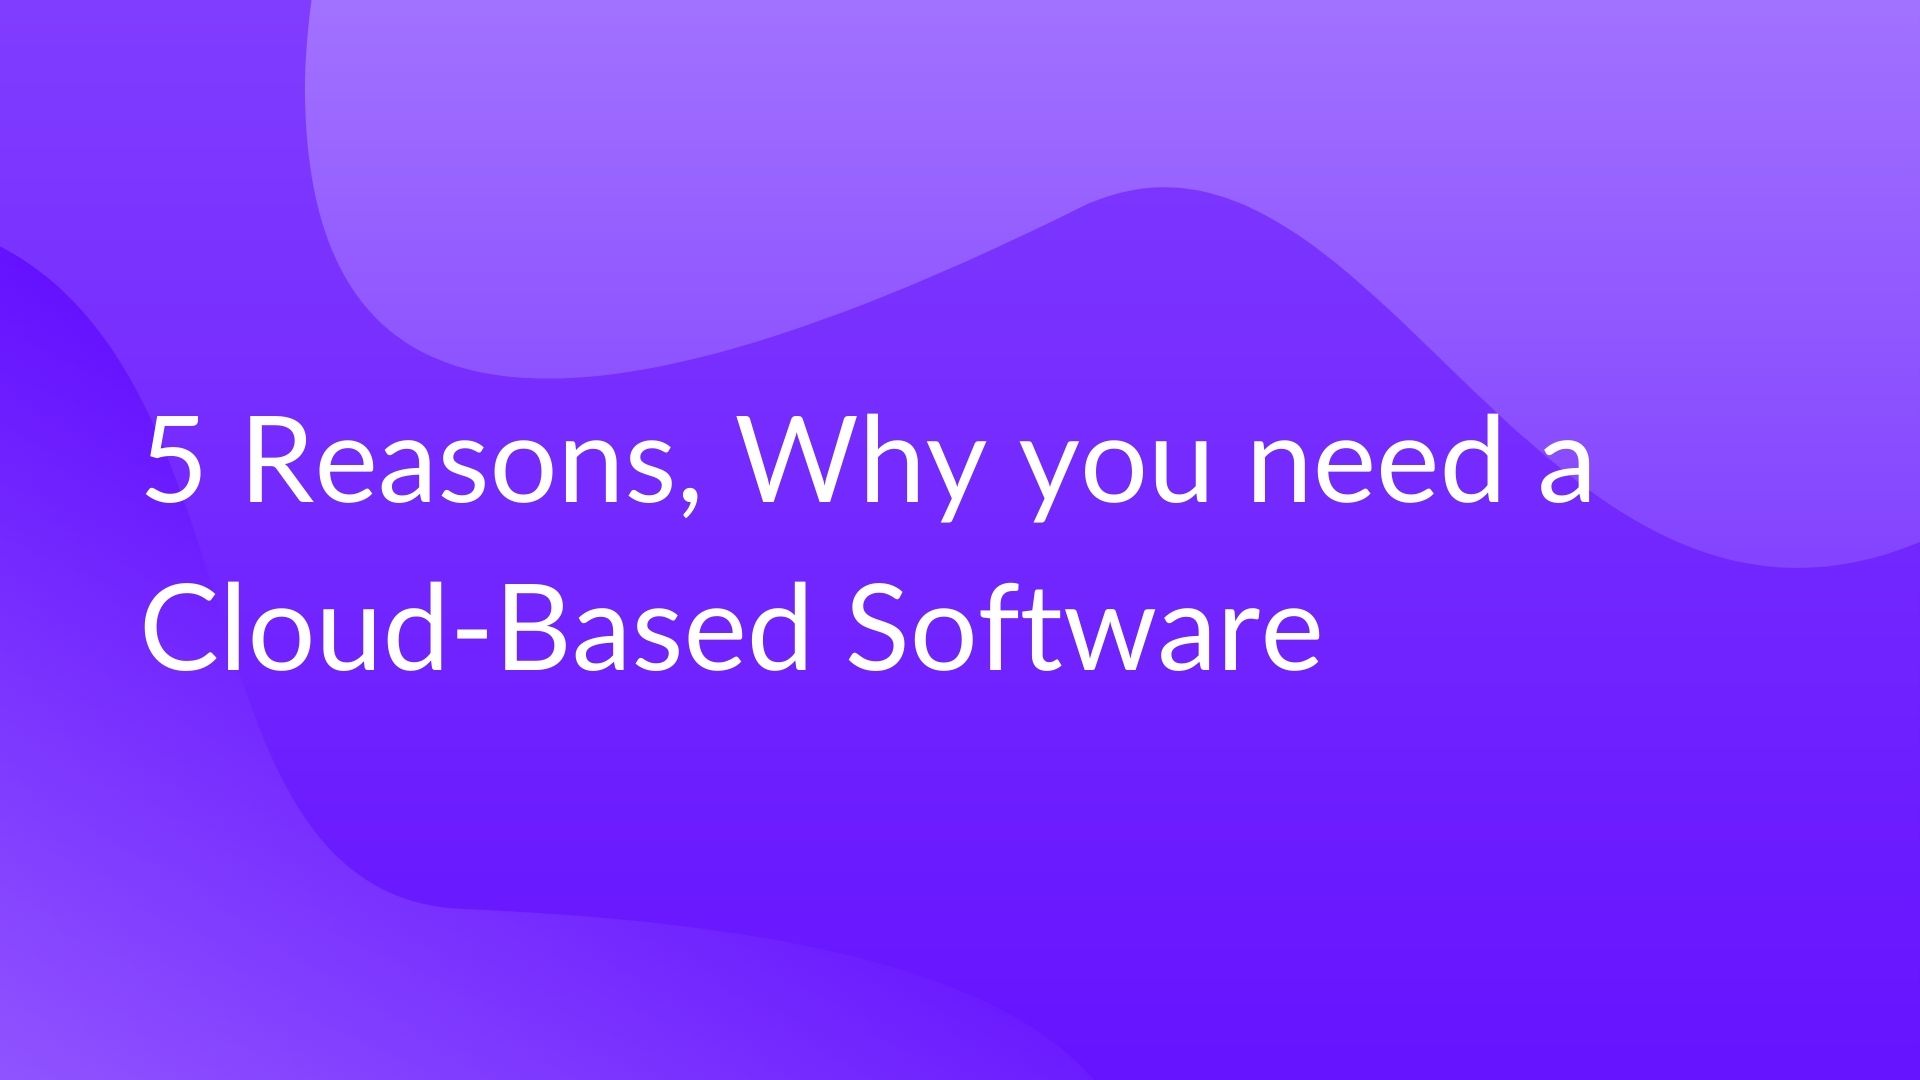 Light Purple Image with text '5 Reasons, Why you need a Cloud-Based Software' on it.